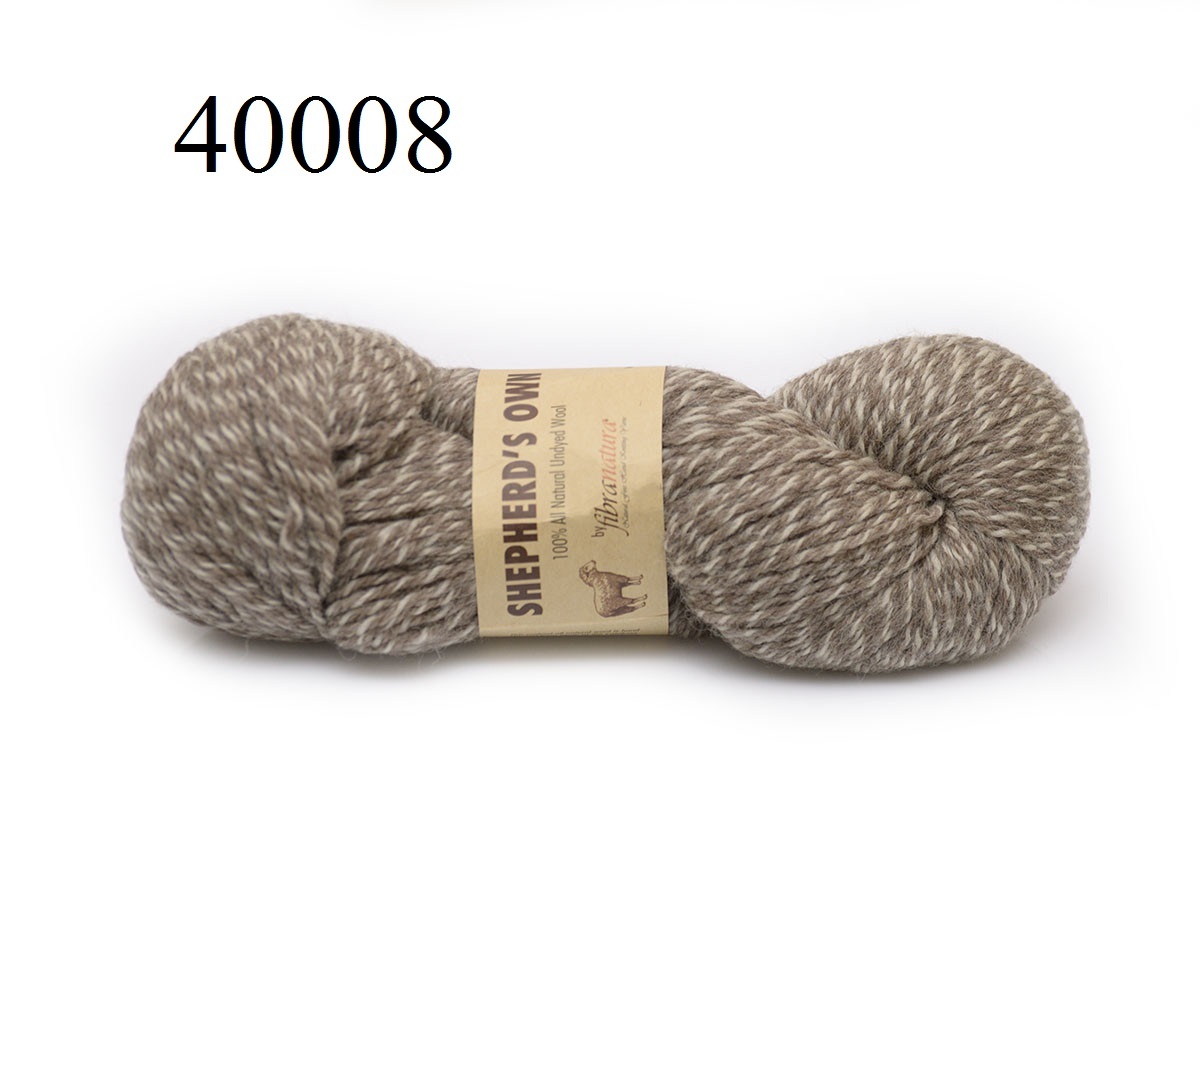 Shepherd's Own 100% All Natural Undyed Wool by Fibranatura - Color 40001